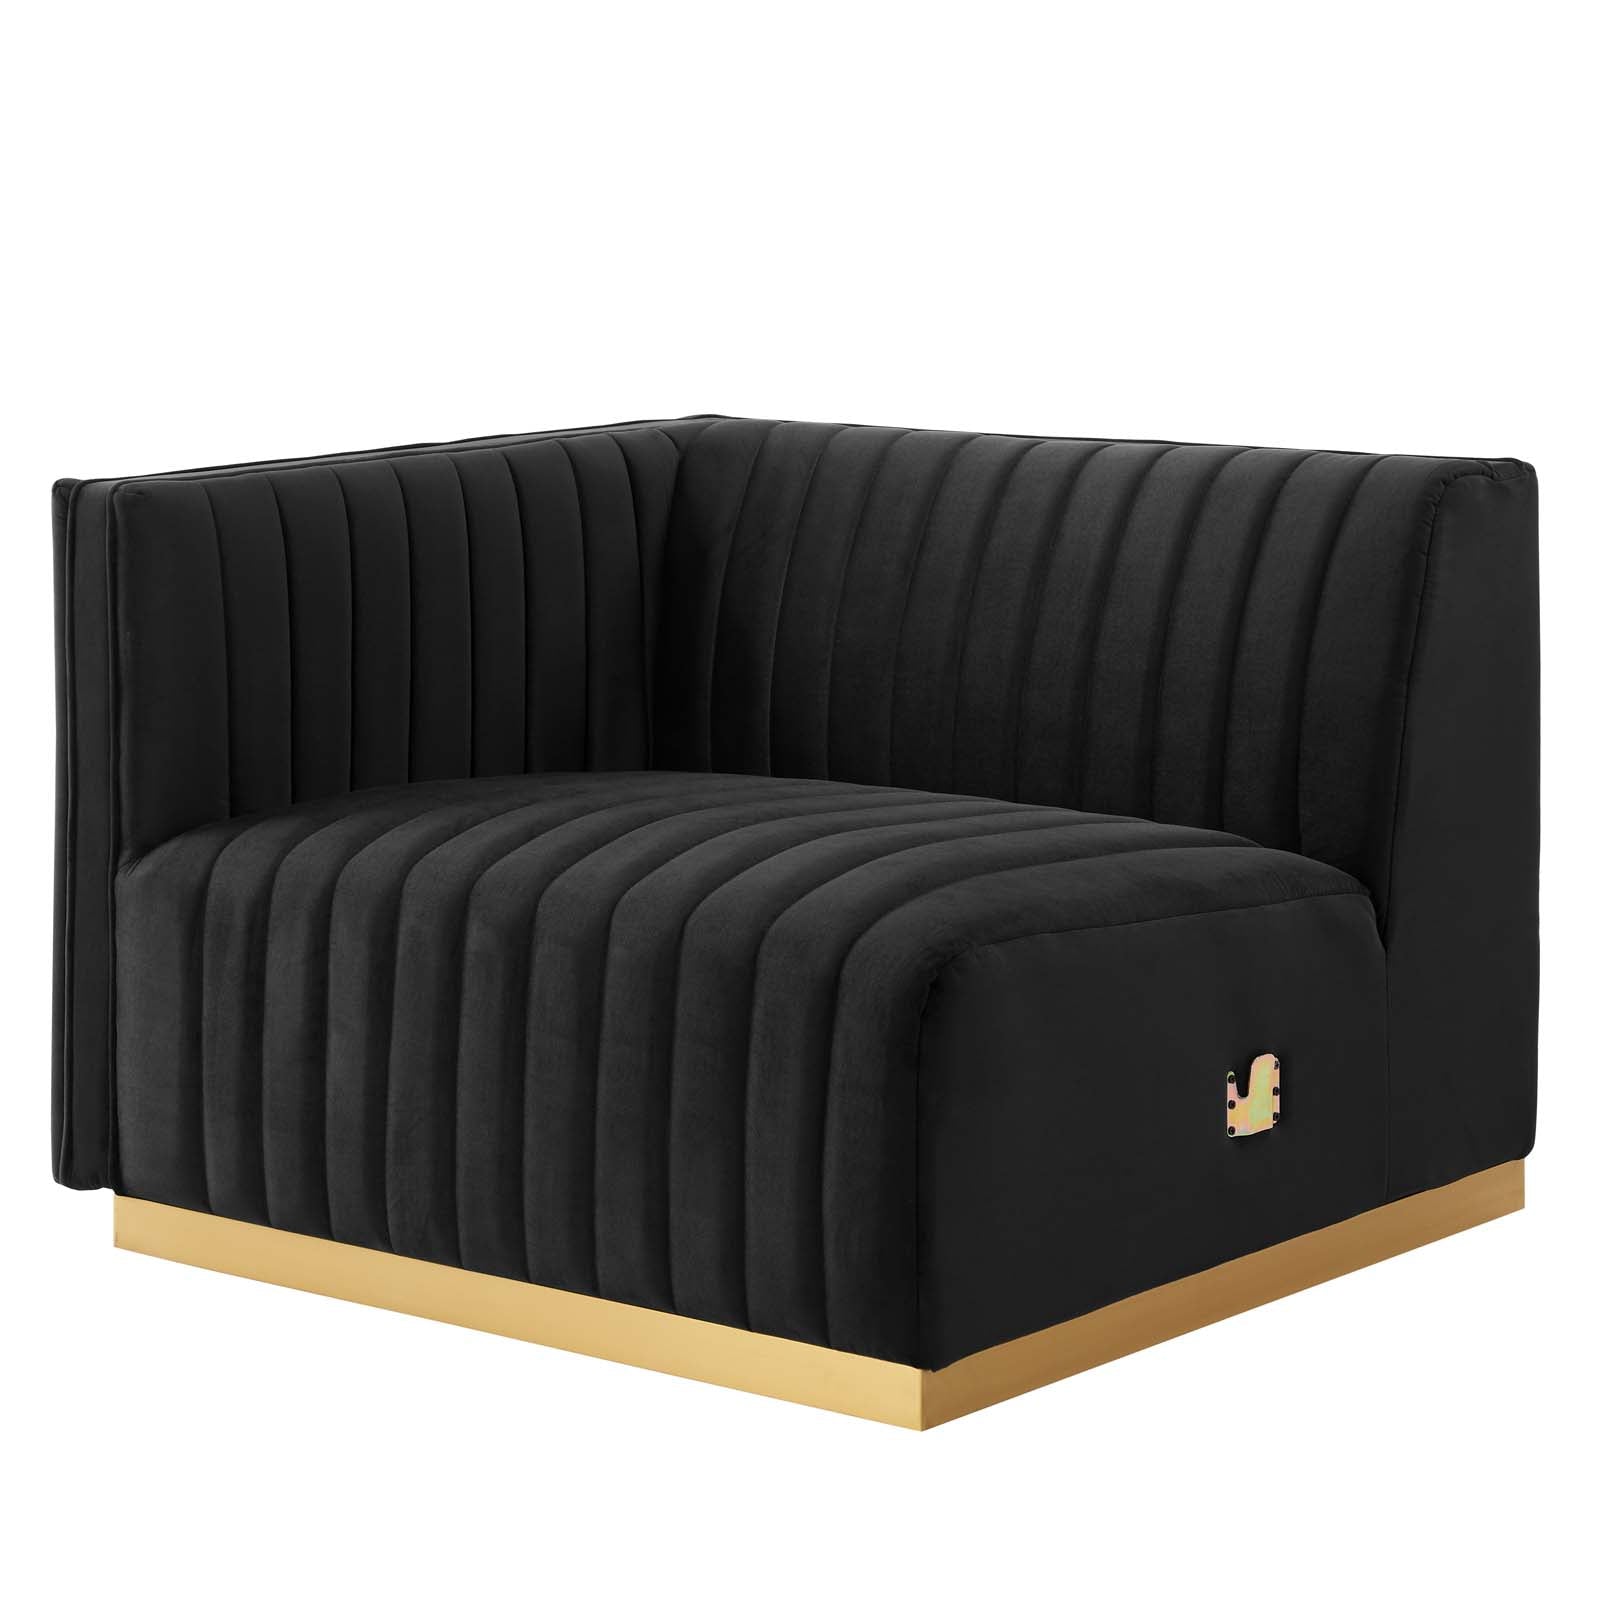 Modway Sectional Sofas - Conjure Channel Tufted Performance Velvet 6 Piece Sectional Gold Black